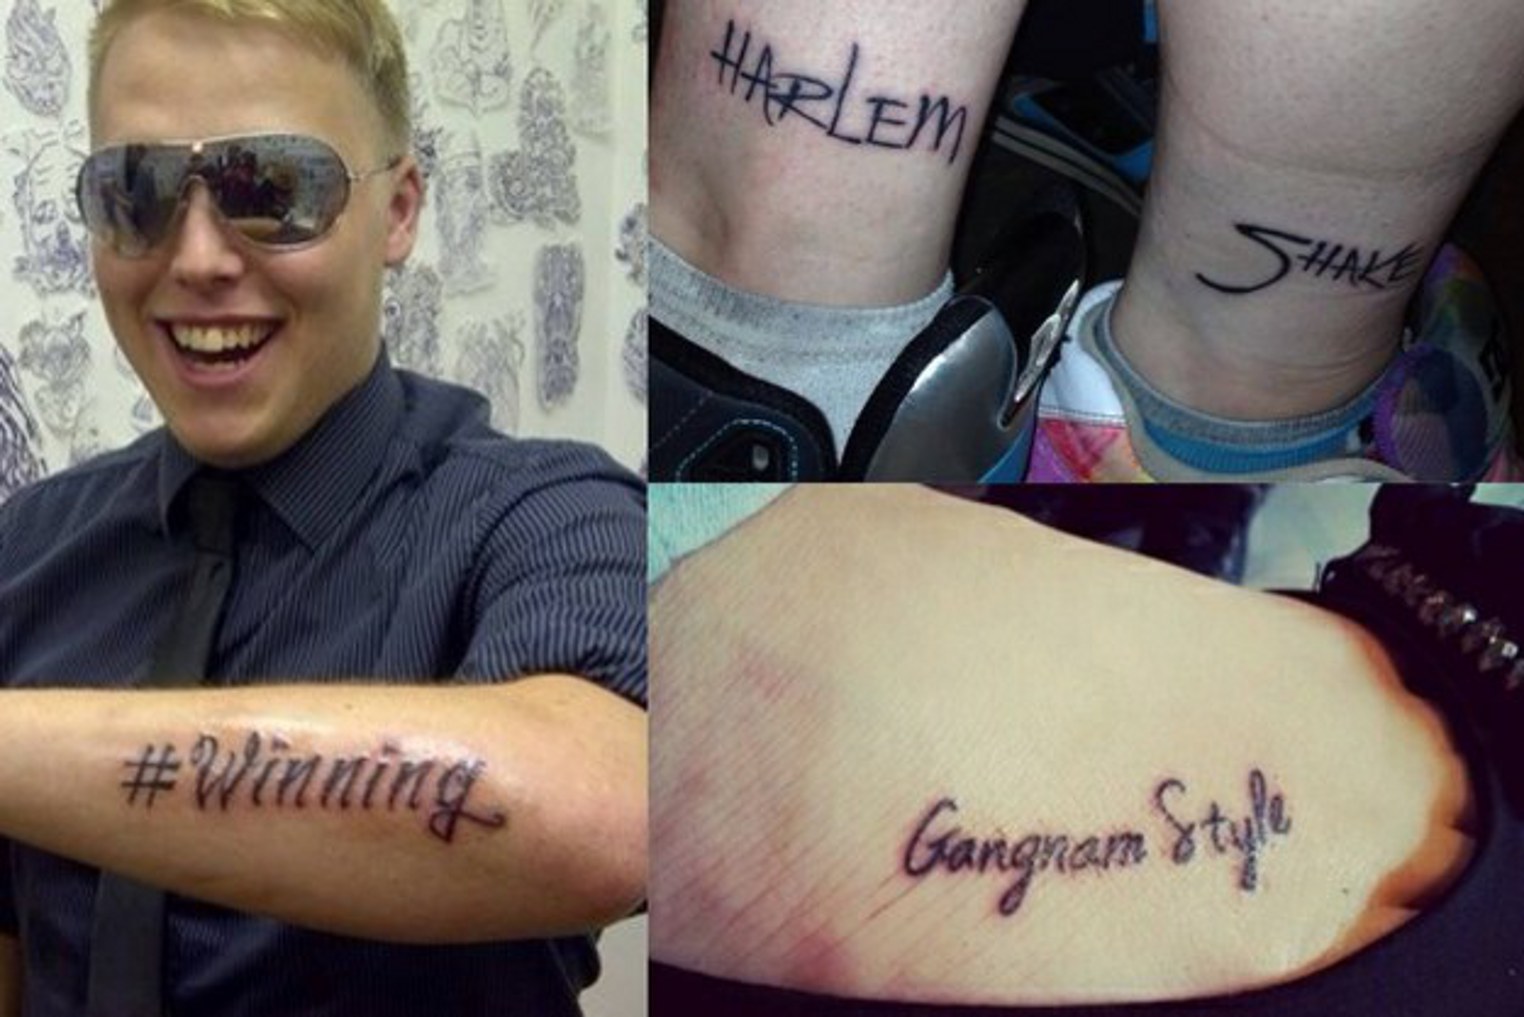 Don't let someone tattoo you unless you proof read it first